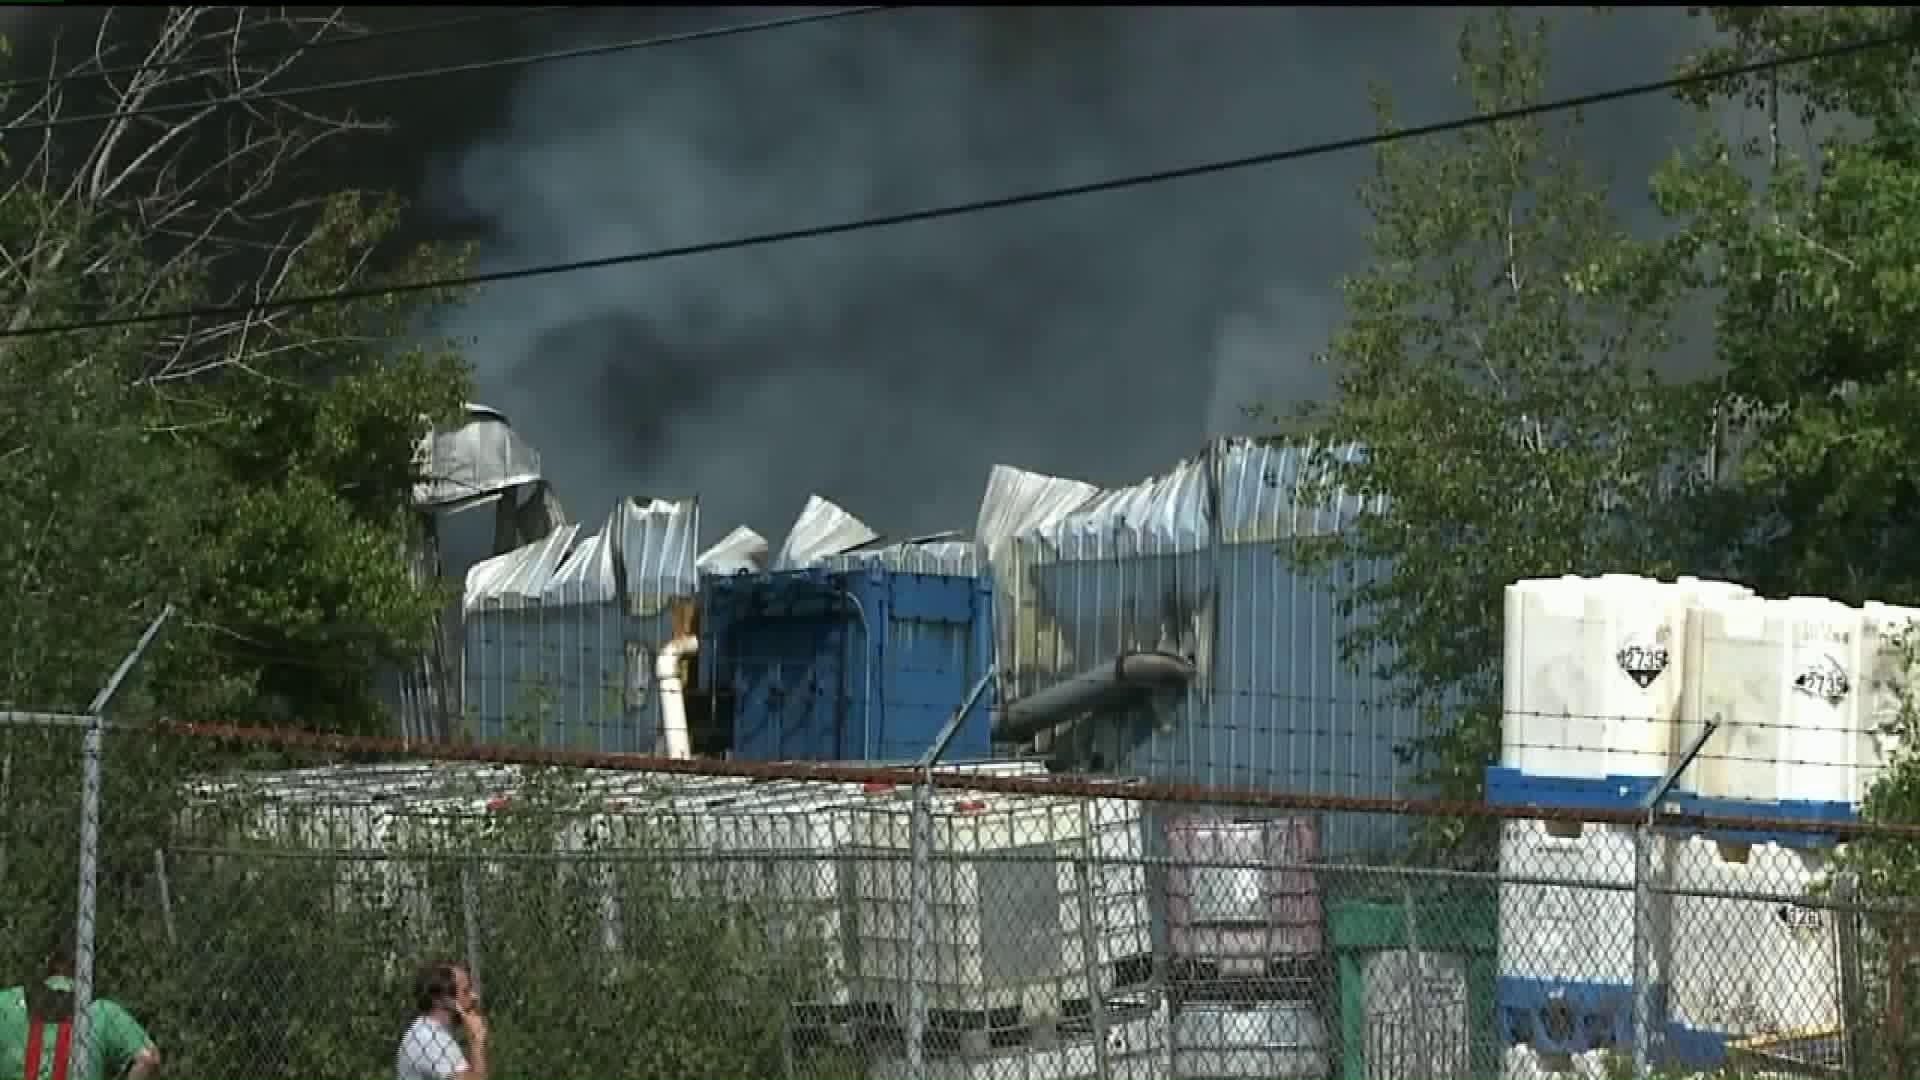 Former Scranton Cooperage Head Facing Hazardous Waste Charges Related to Huge Fire